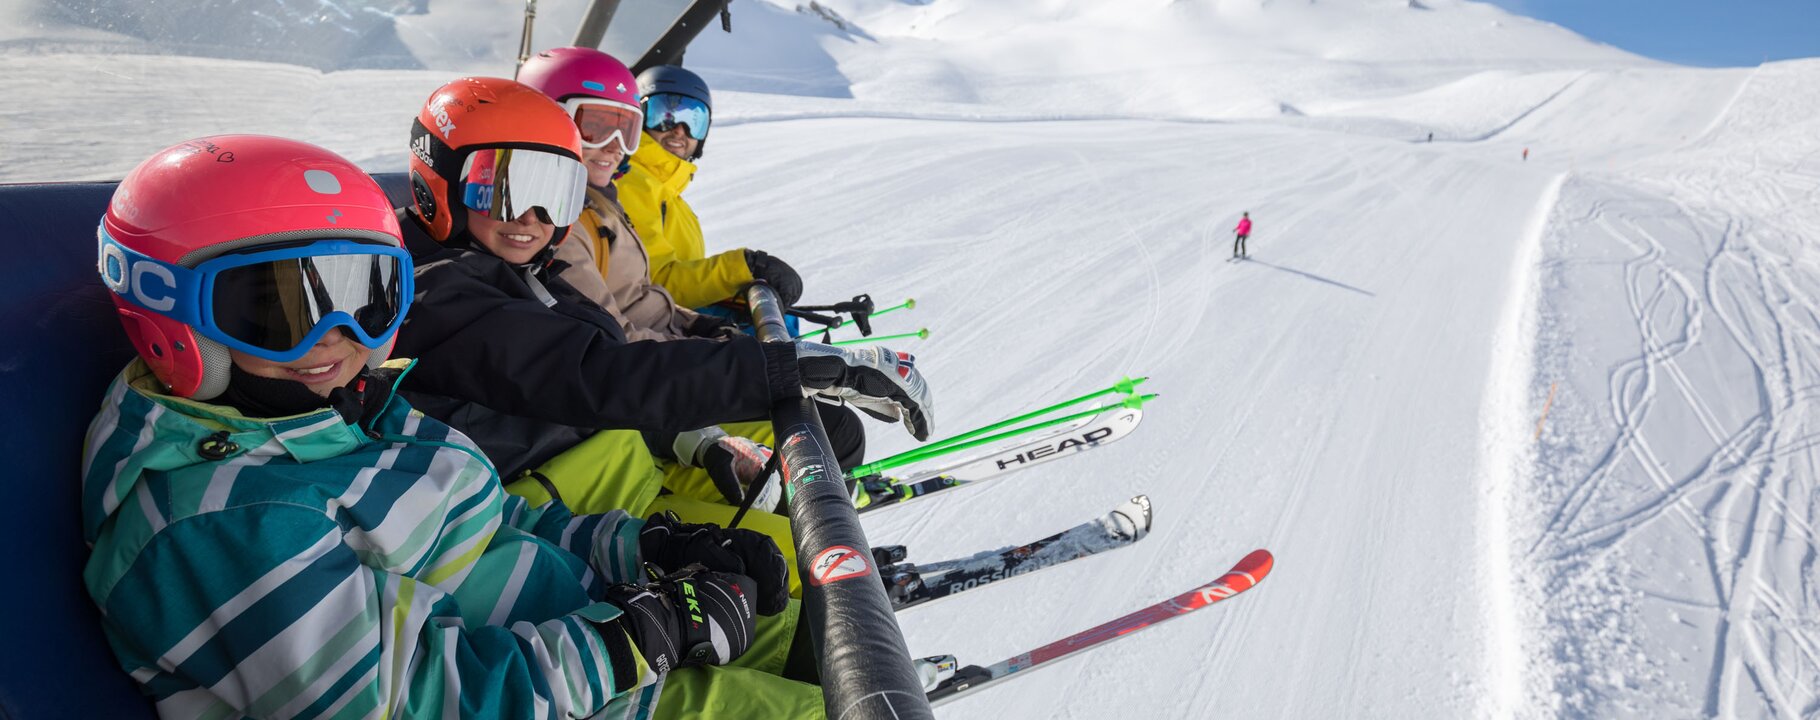 Skiing with the family in Serfaus-Fiss-Ladis in Tyrol Austria | © Andreas Kirschner